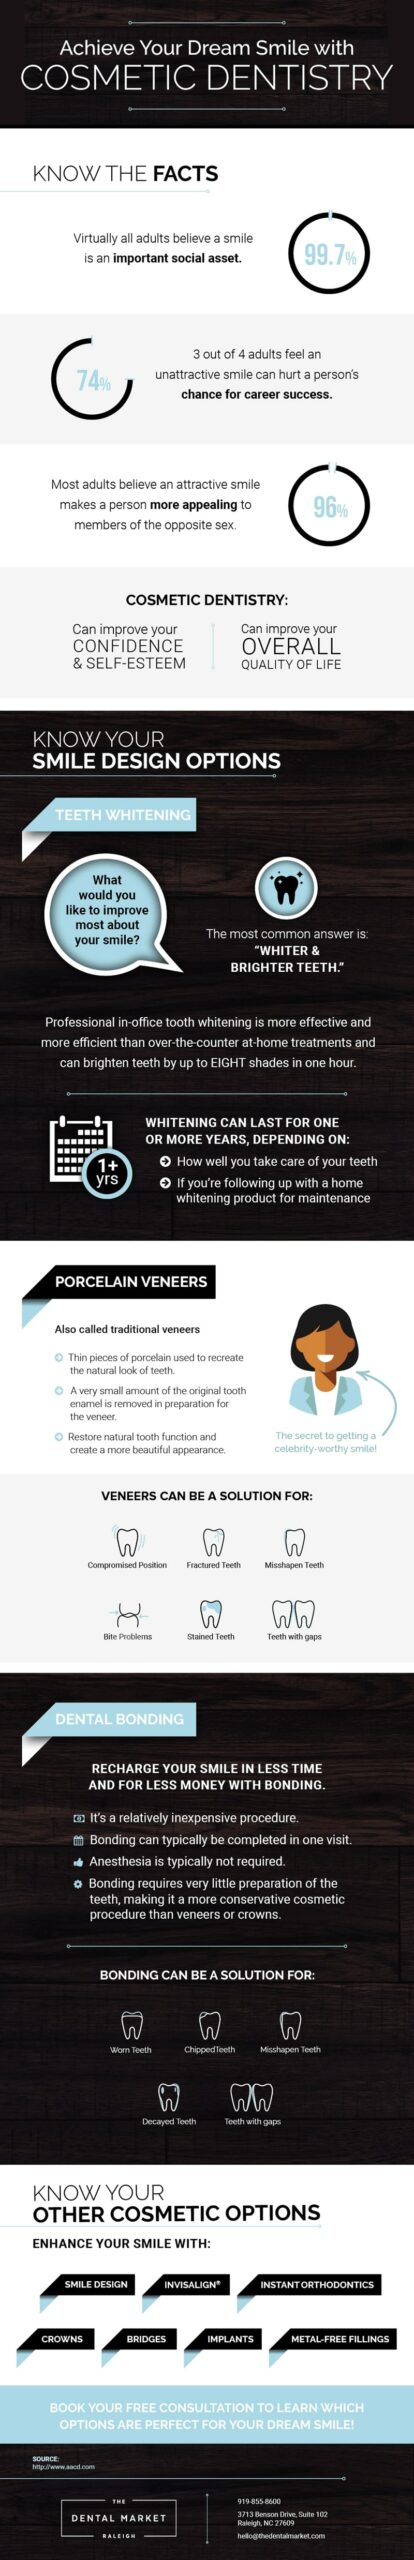 Infographic on ways to improve your smile with cosmetic dentistry at The Dental Market